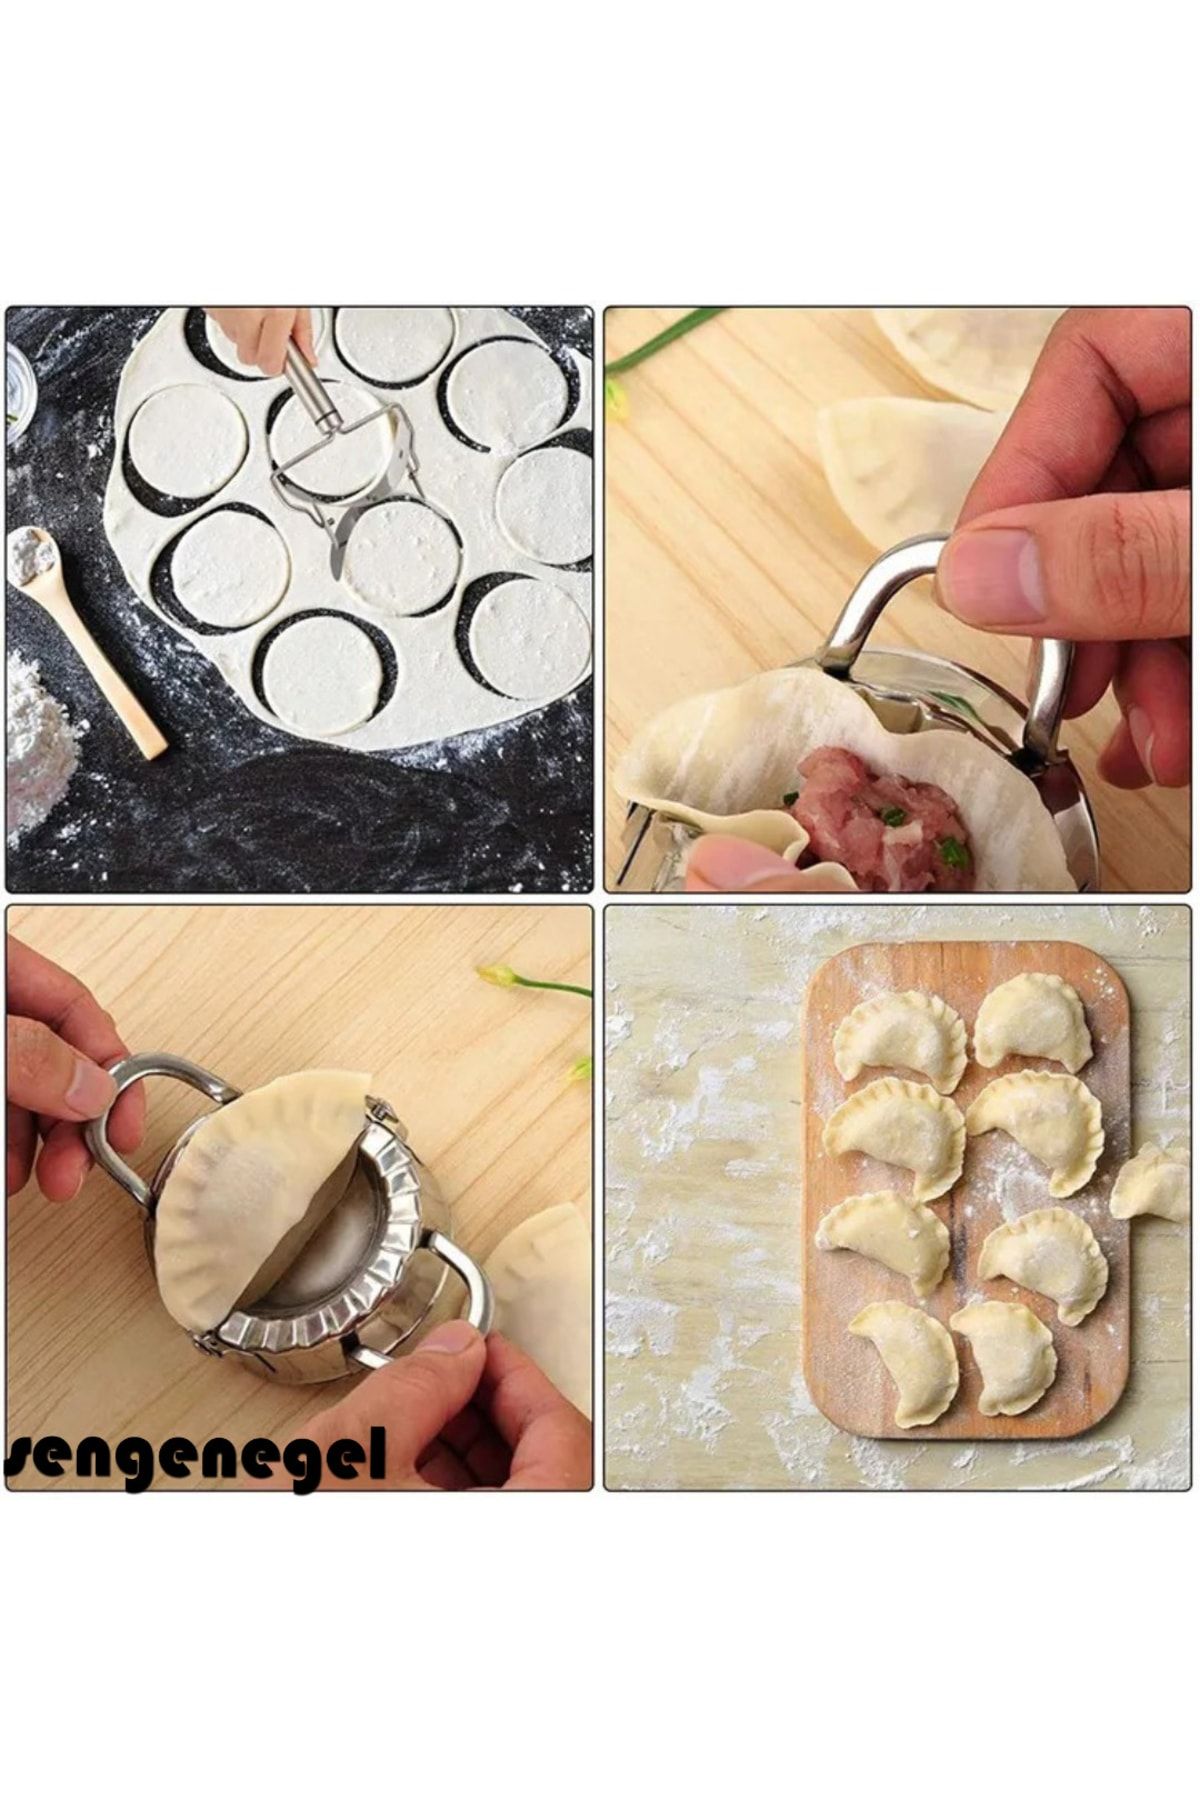 sengenegel Dough Press and Pastry Mold, Ravioli Set, Pastry Dough, Cookie,  Meatball Mold Preparation and Shaping - Trendyol